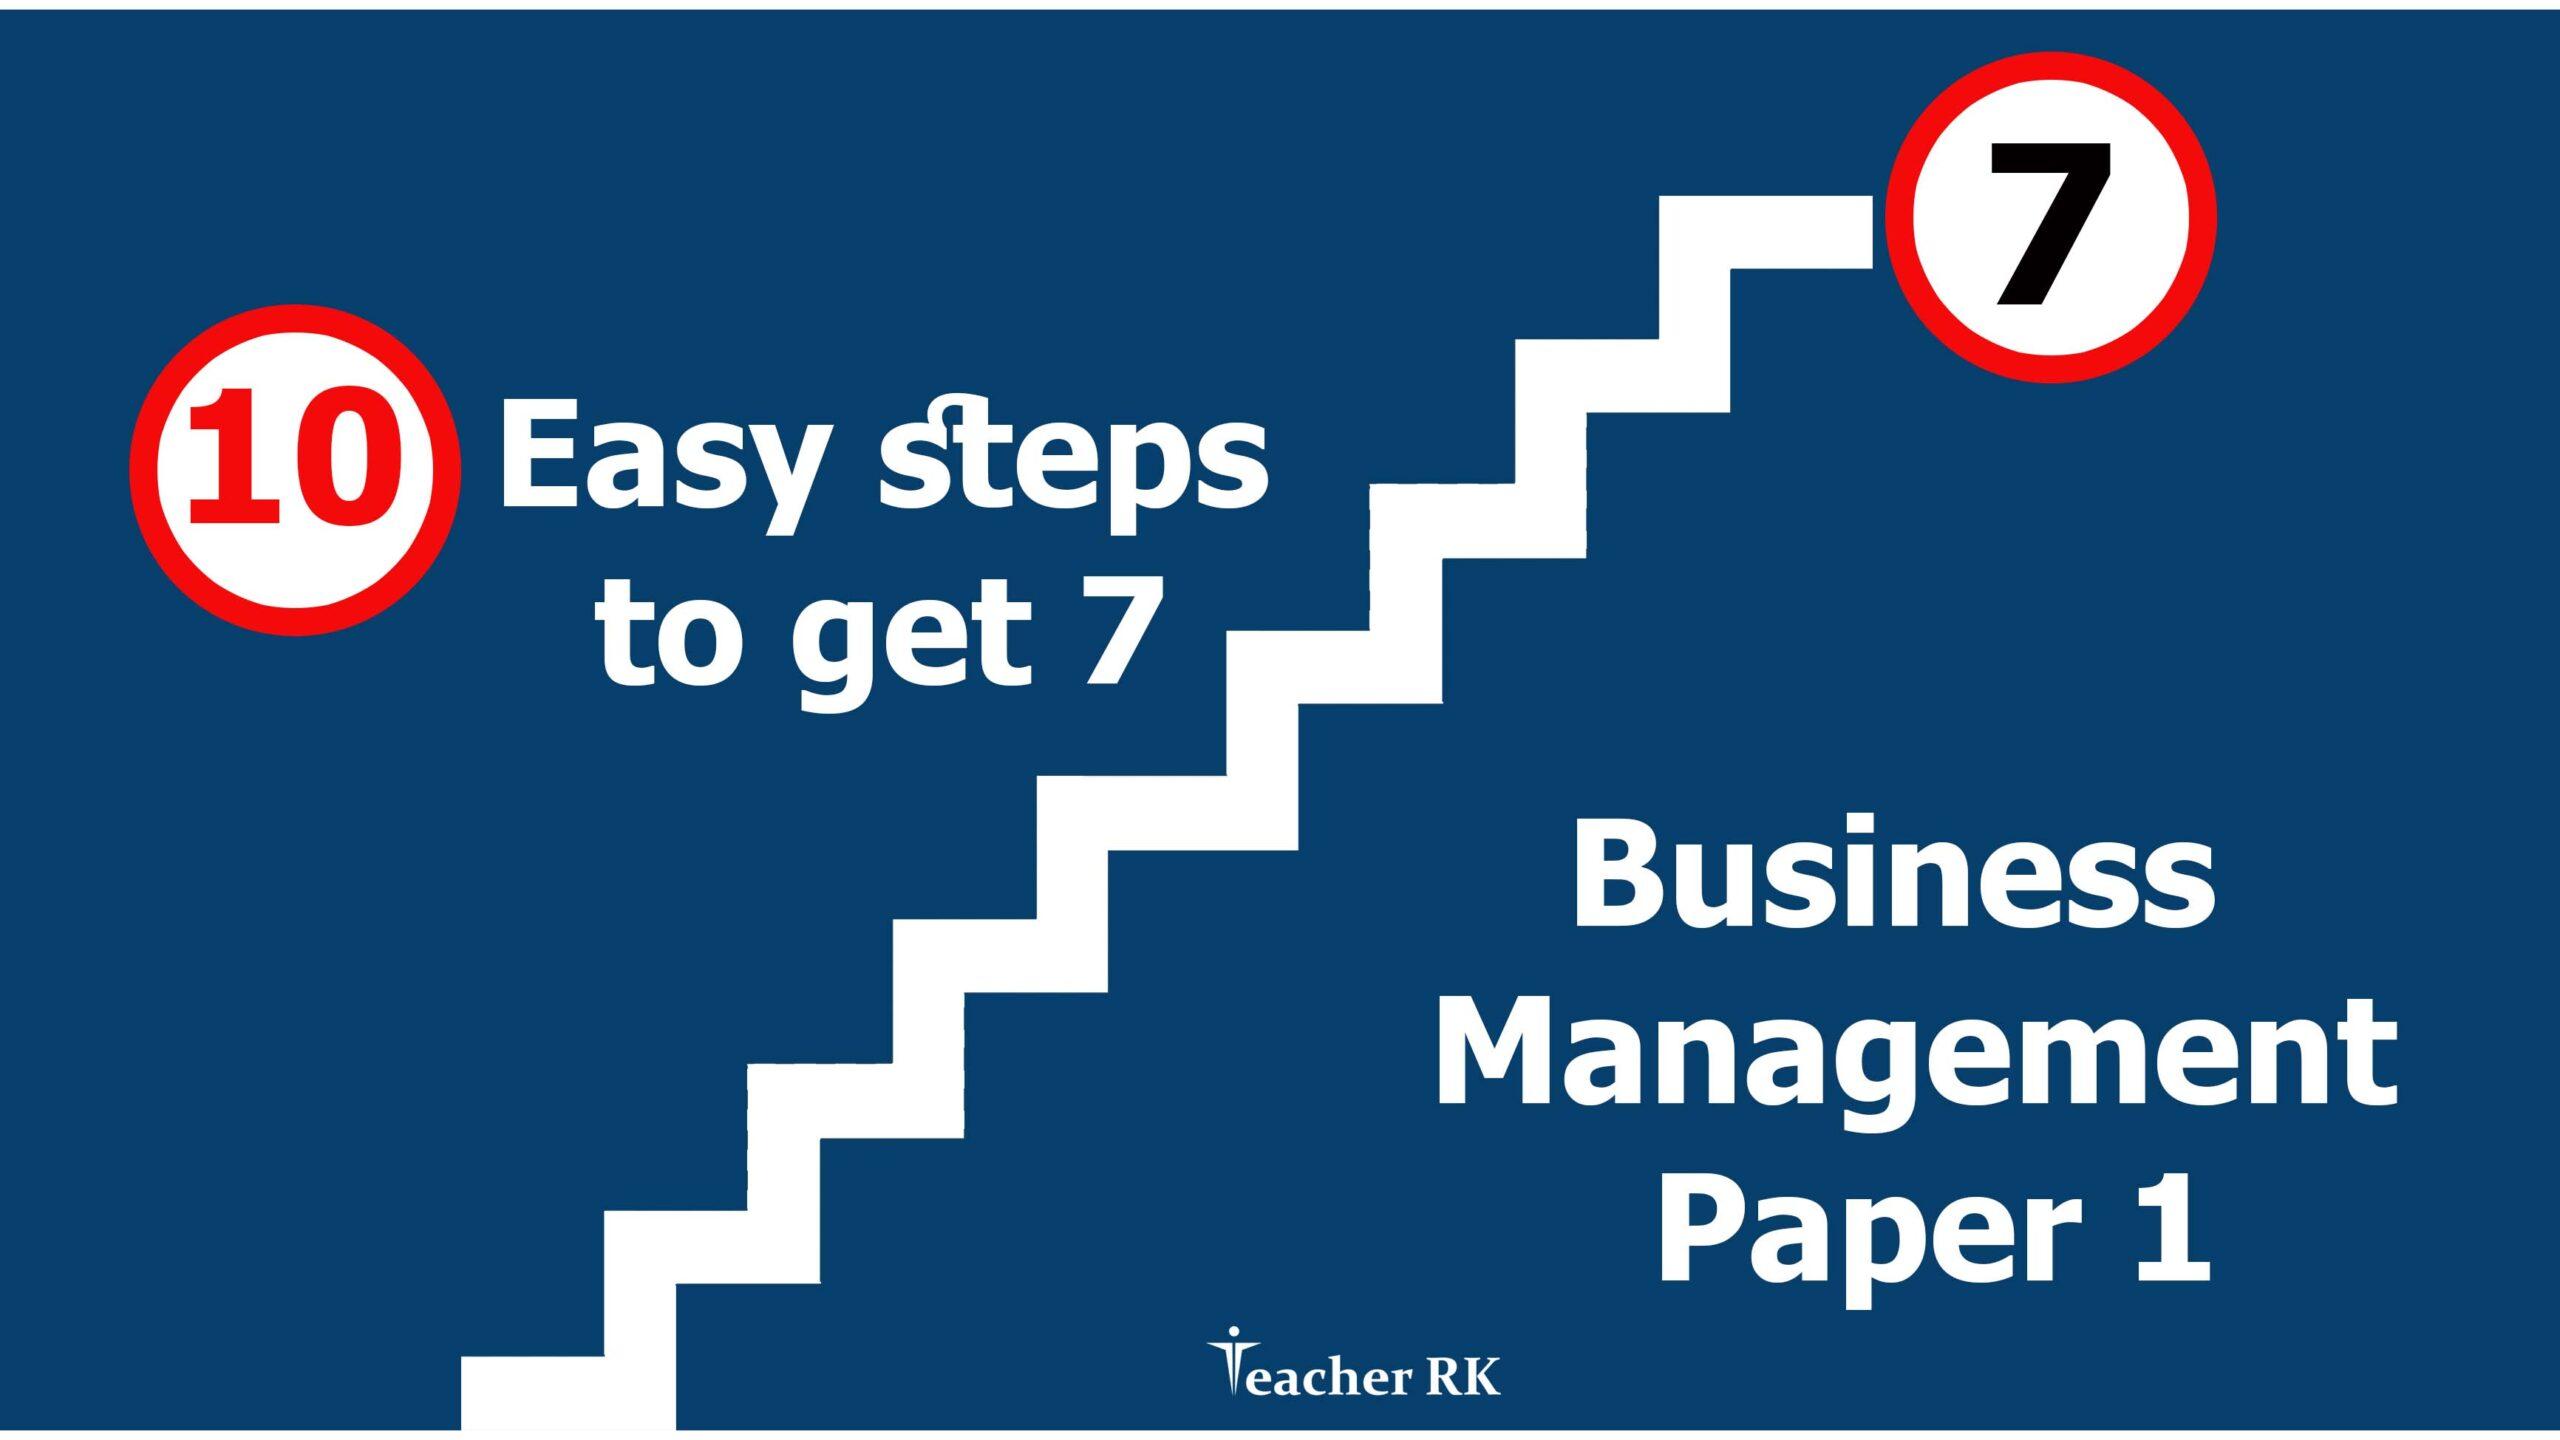 How to get 7 on business management paper 1